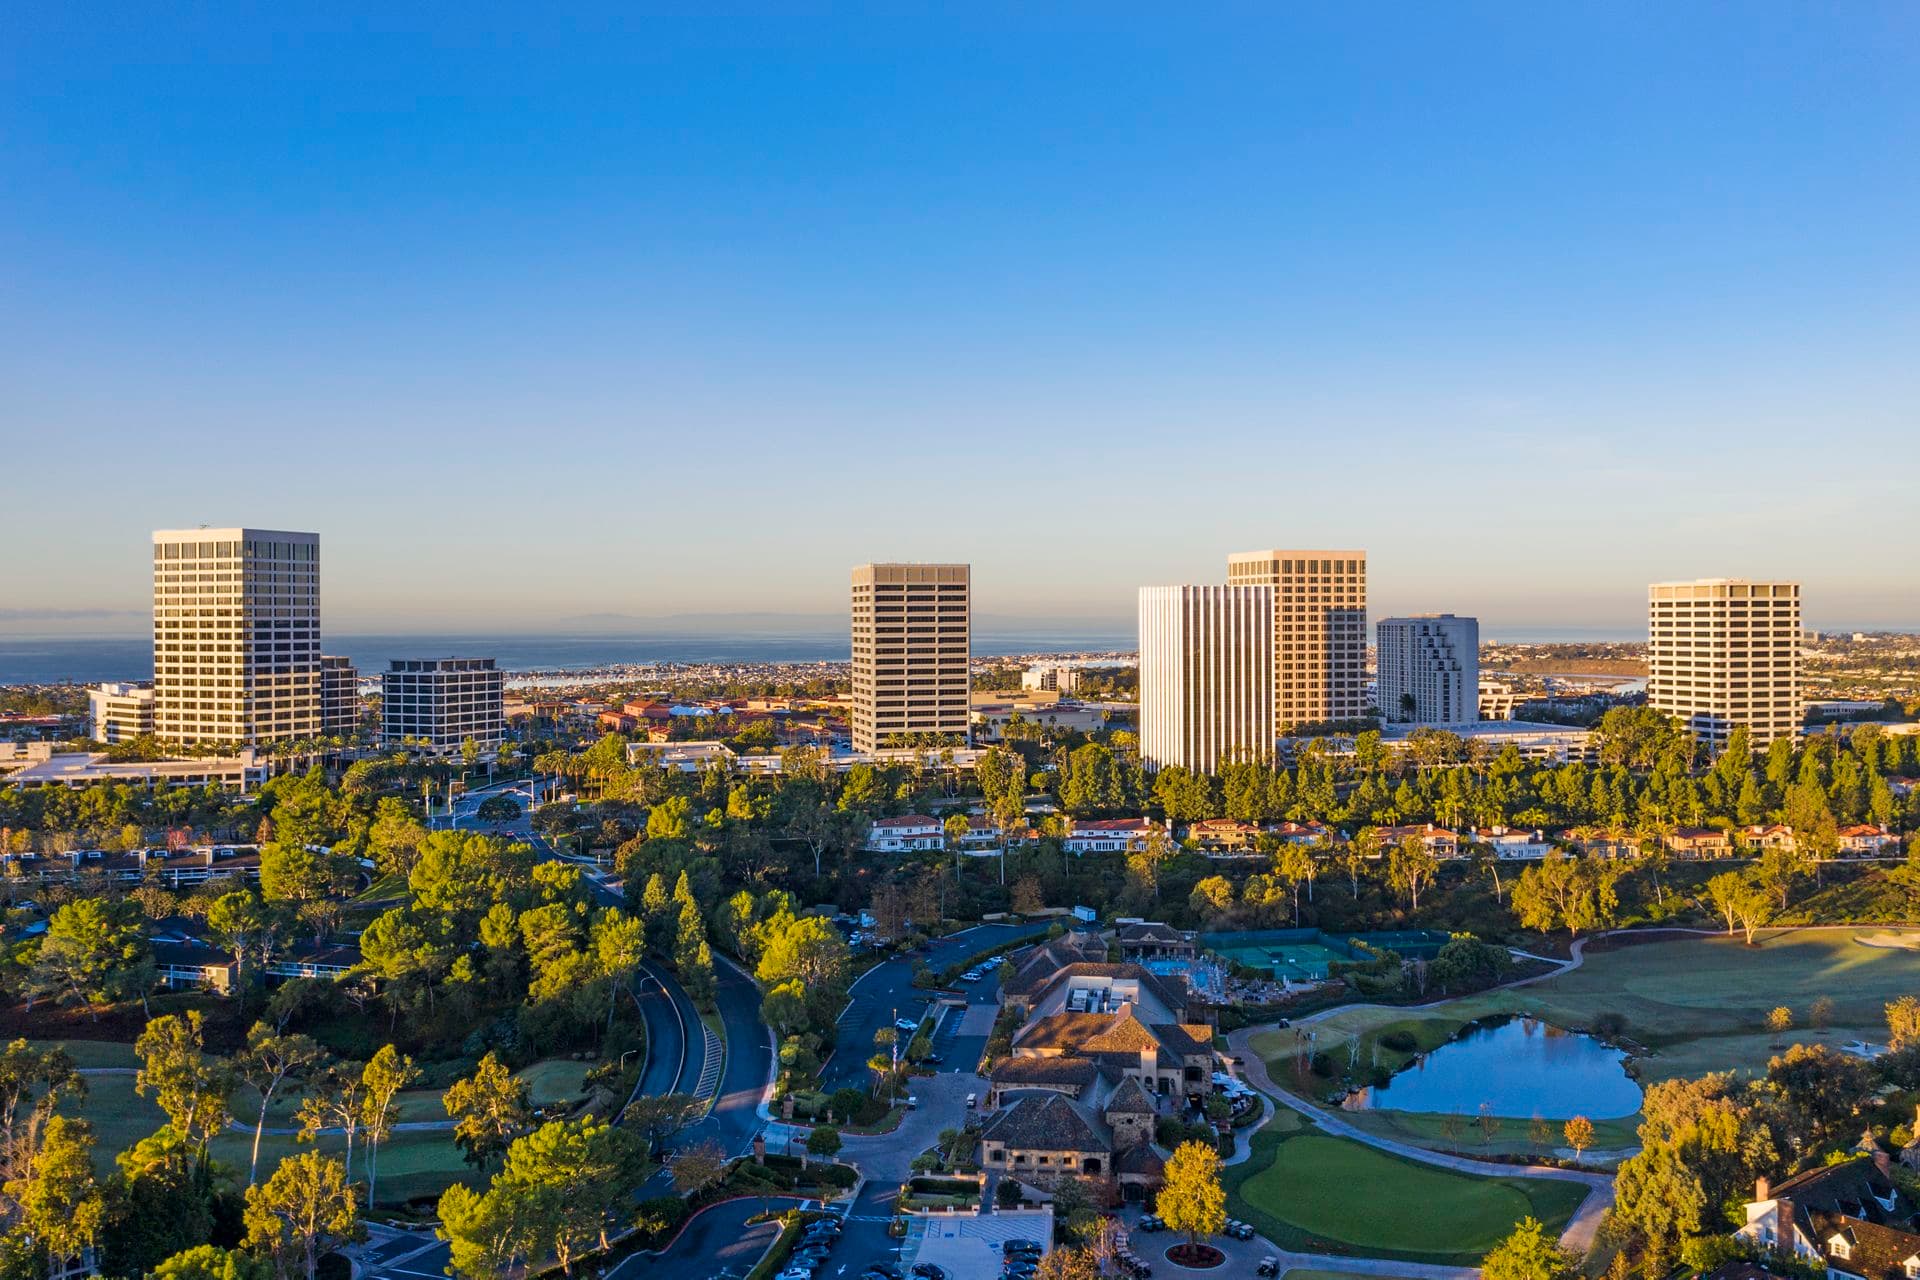 Aerial photography of the Newport Center area featuring snowy mountains in Newport Beach, CA